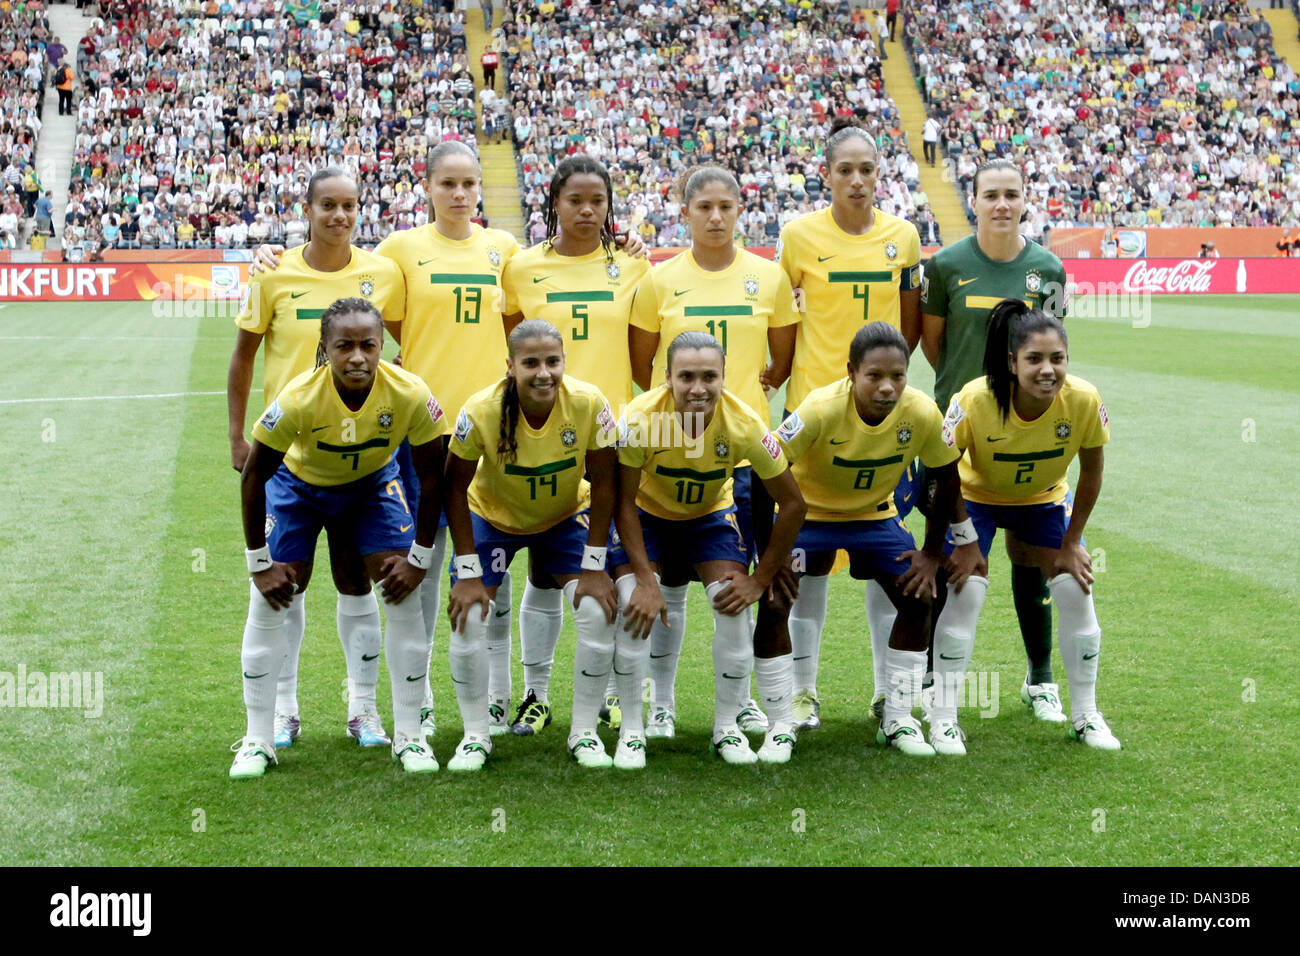 The starting line-up of Brazil poses for the group photo prior the Group D match Equatorial Guinea against Brazil of FIFA Women's World Cup soccer tournament at the FIFA Women's World Cup Stadium in Frankfurt, Germany, 06 July 2011. (back row l-r) Rosana, Erika, Renata Costa, Cristiane, Aline, Andreia, (front row l-r) Ester, Fabiana, Marta, Formiga, Maurine. Foto: Fredrik von Erich Stock Photo